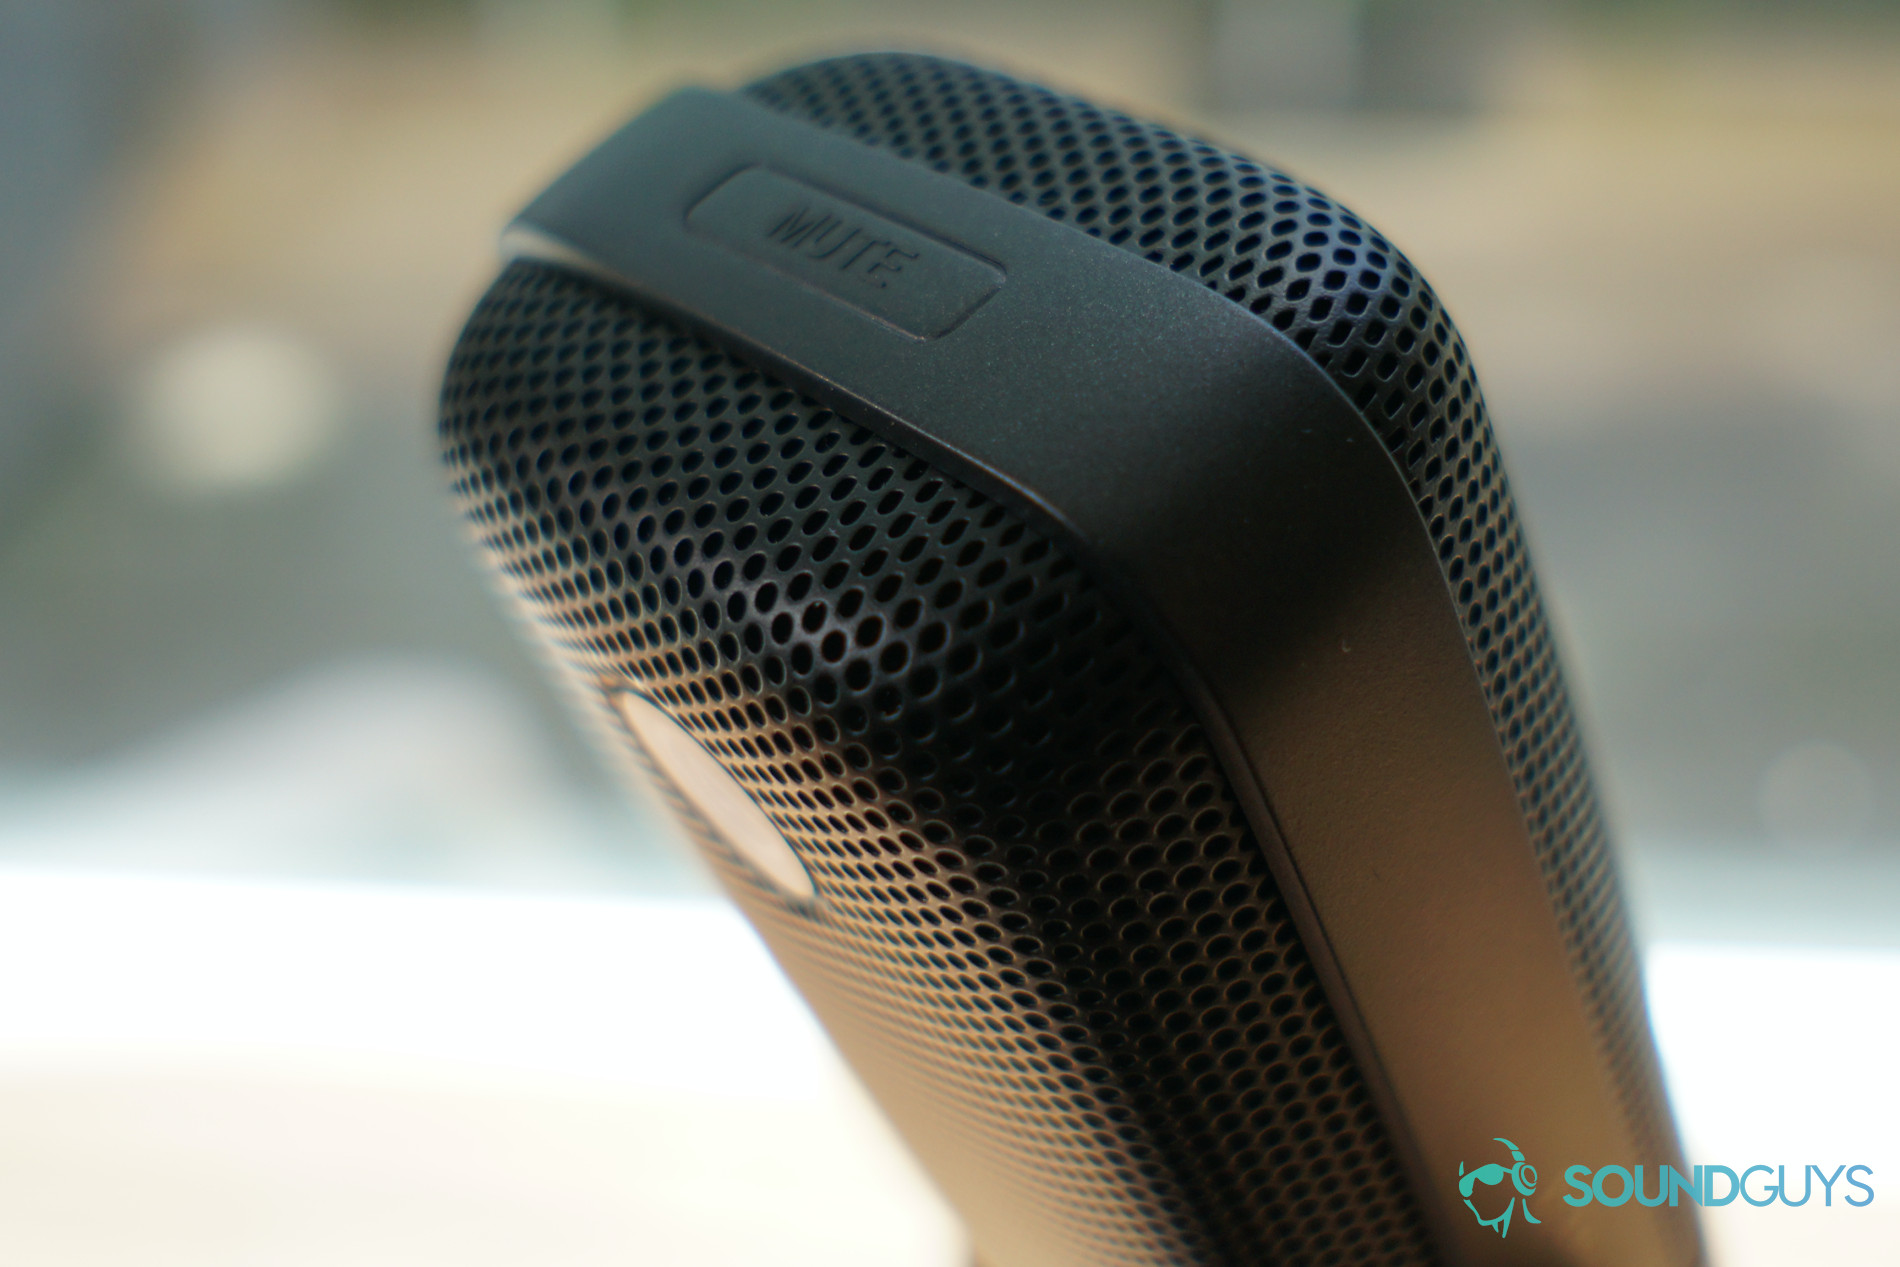 Close up image of the Elgato Wave 3 microphone mute button